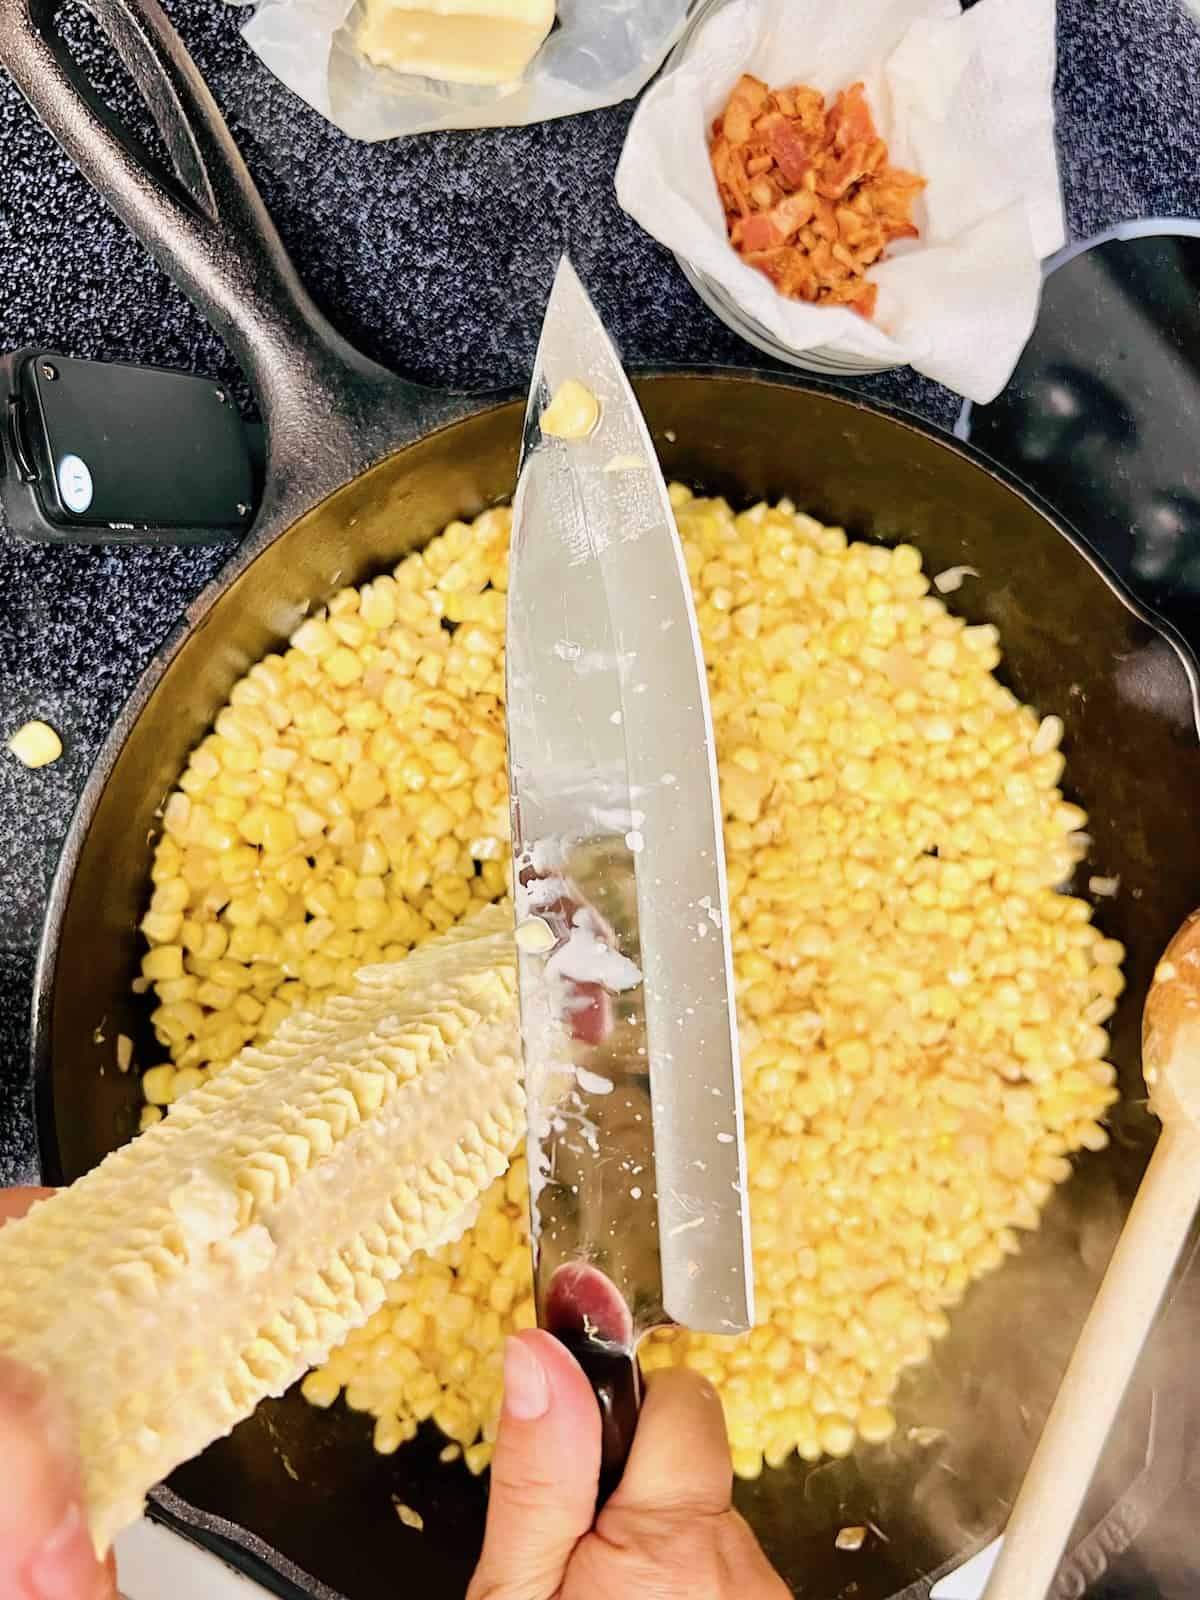 Scraping corn cobs without the kernels with the backend of chefs knife over a pan.